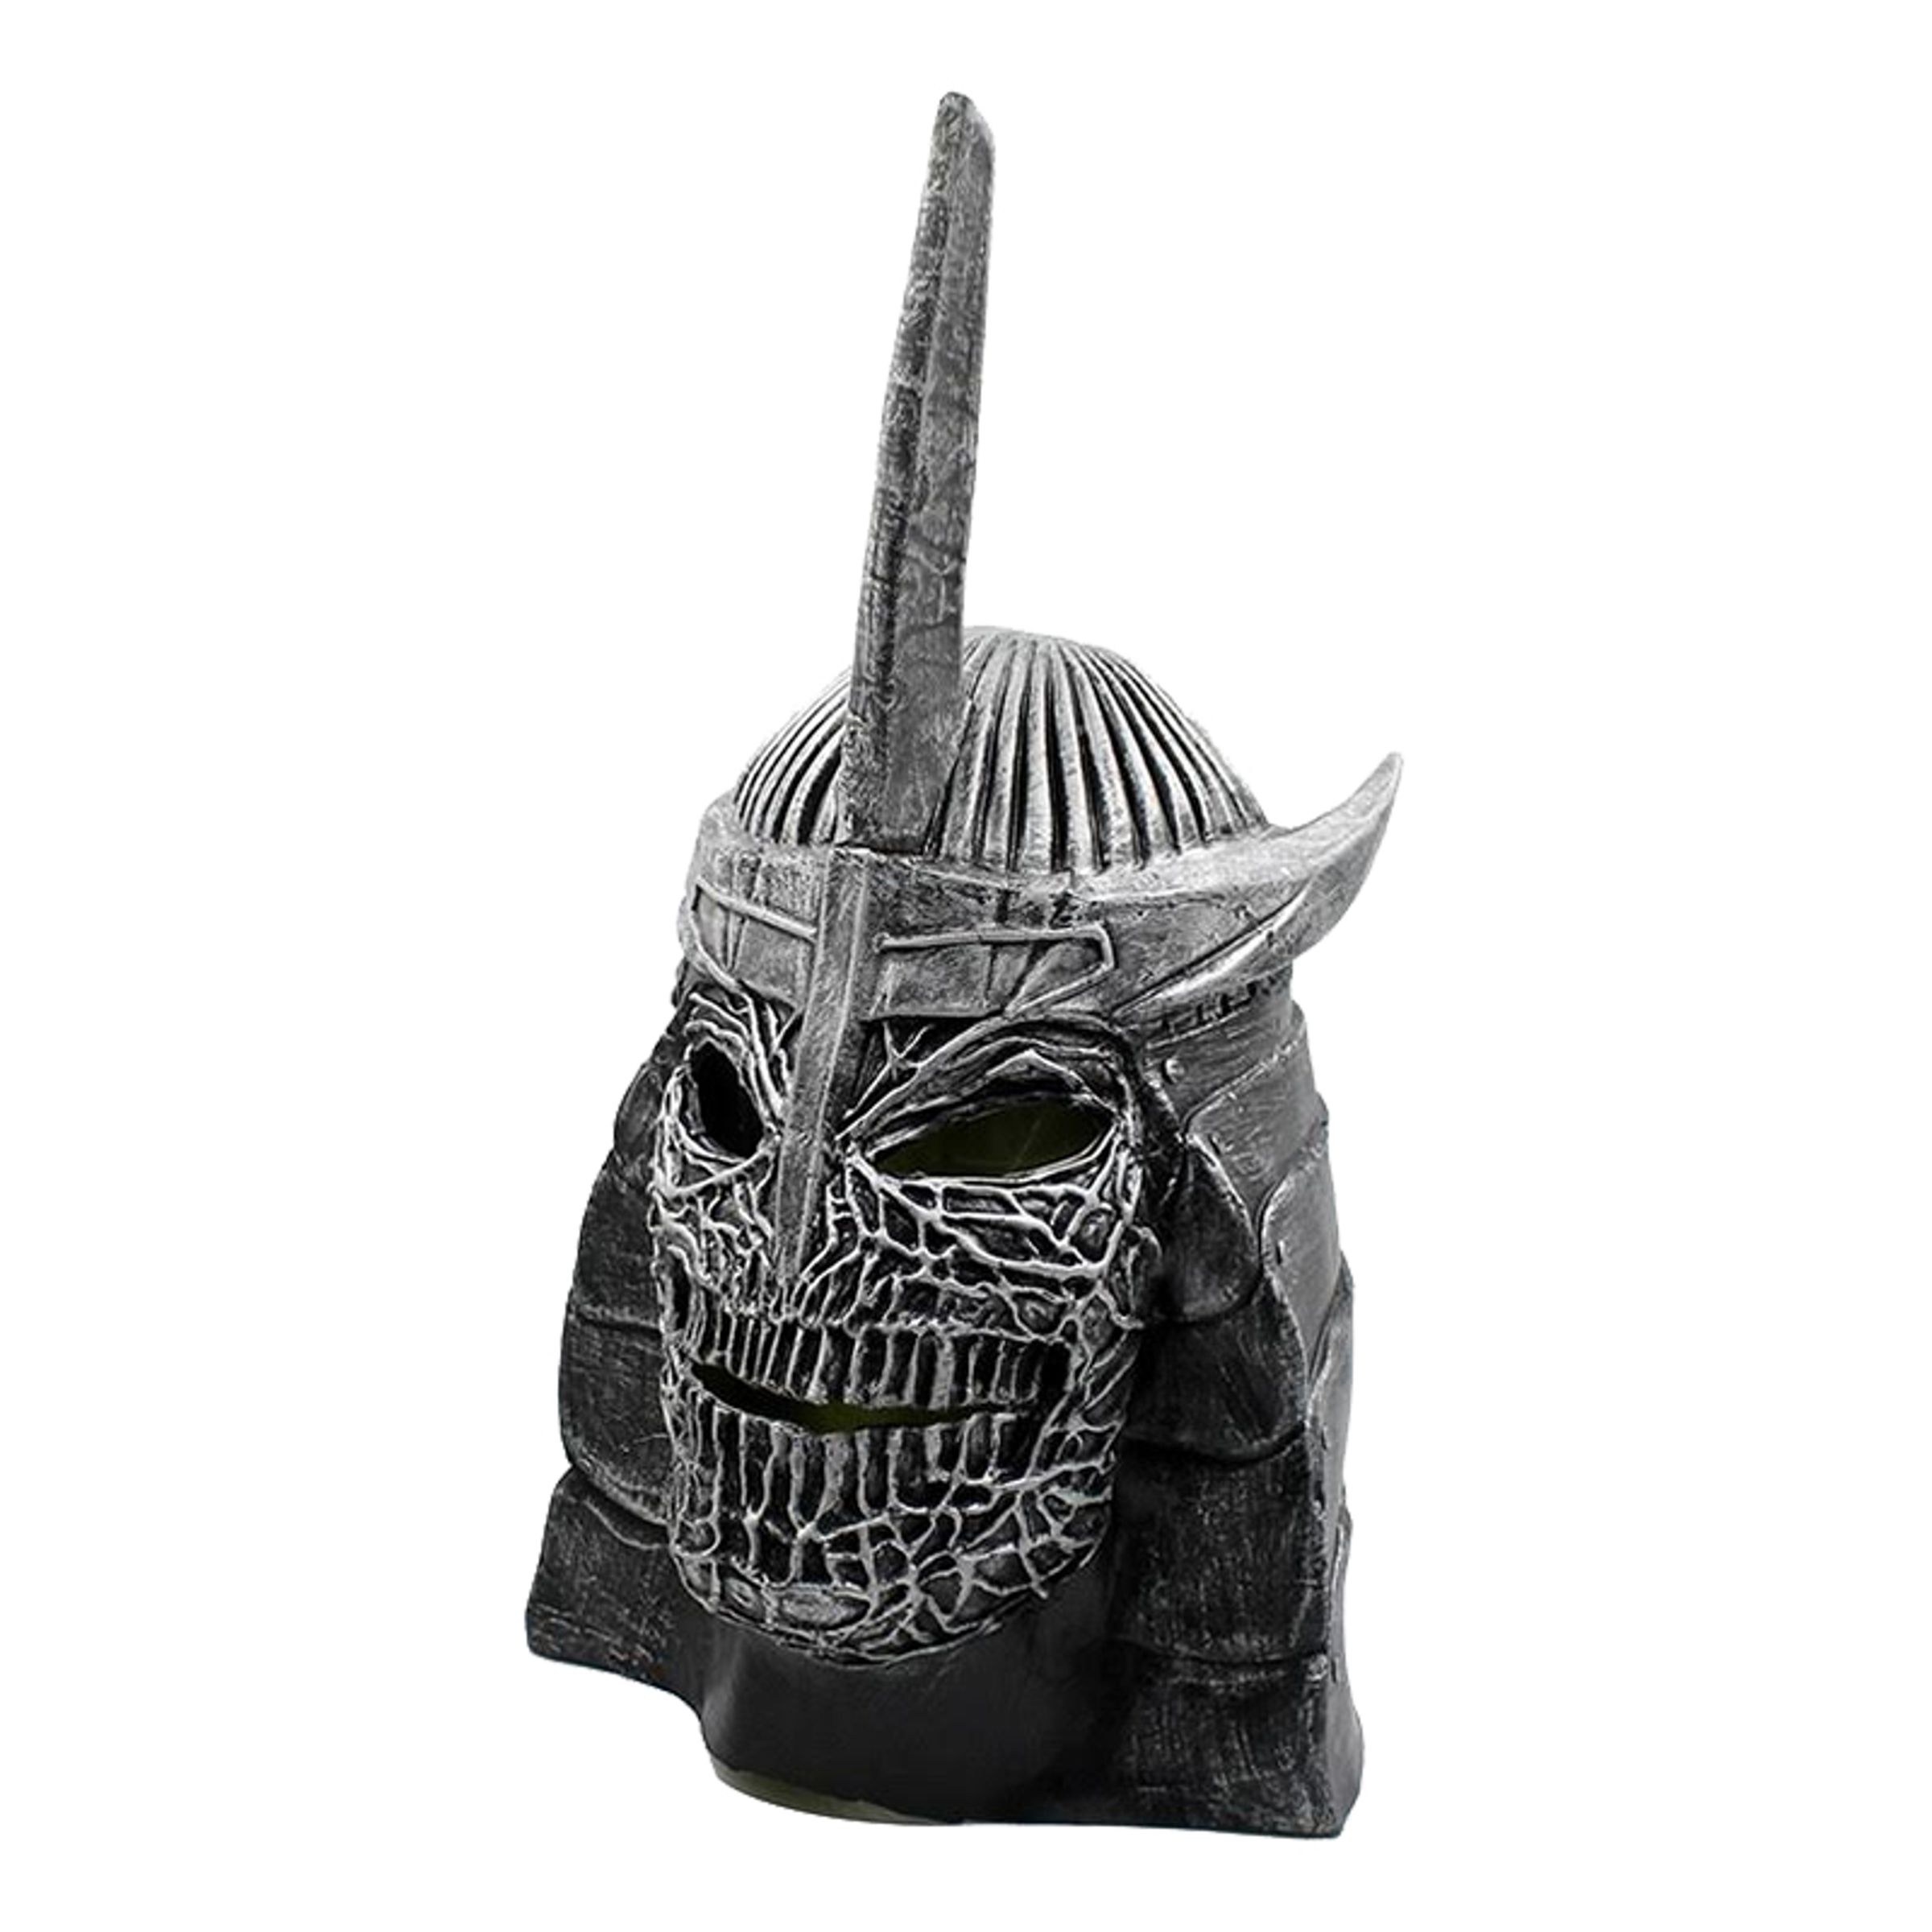 Dead Warrior Mask - One size